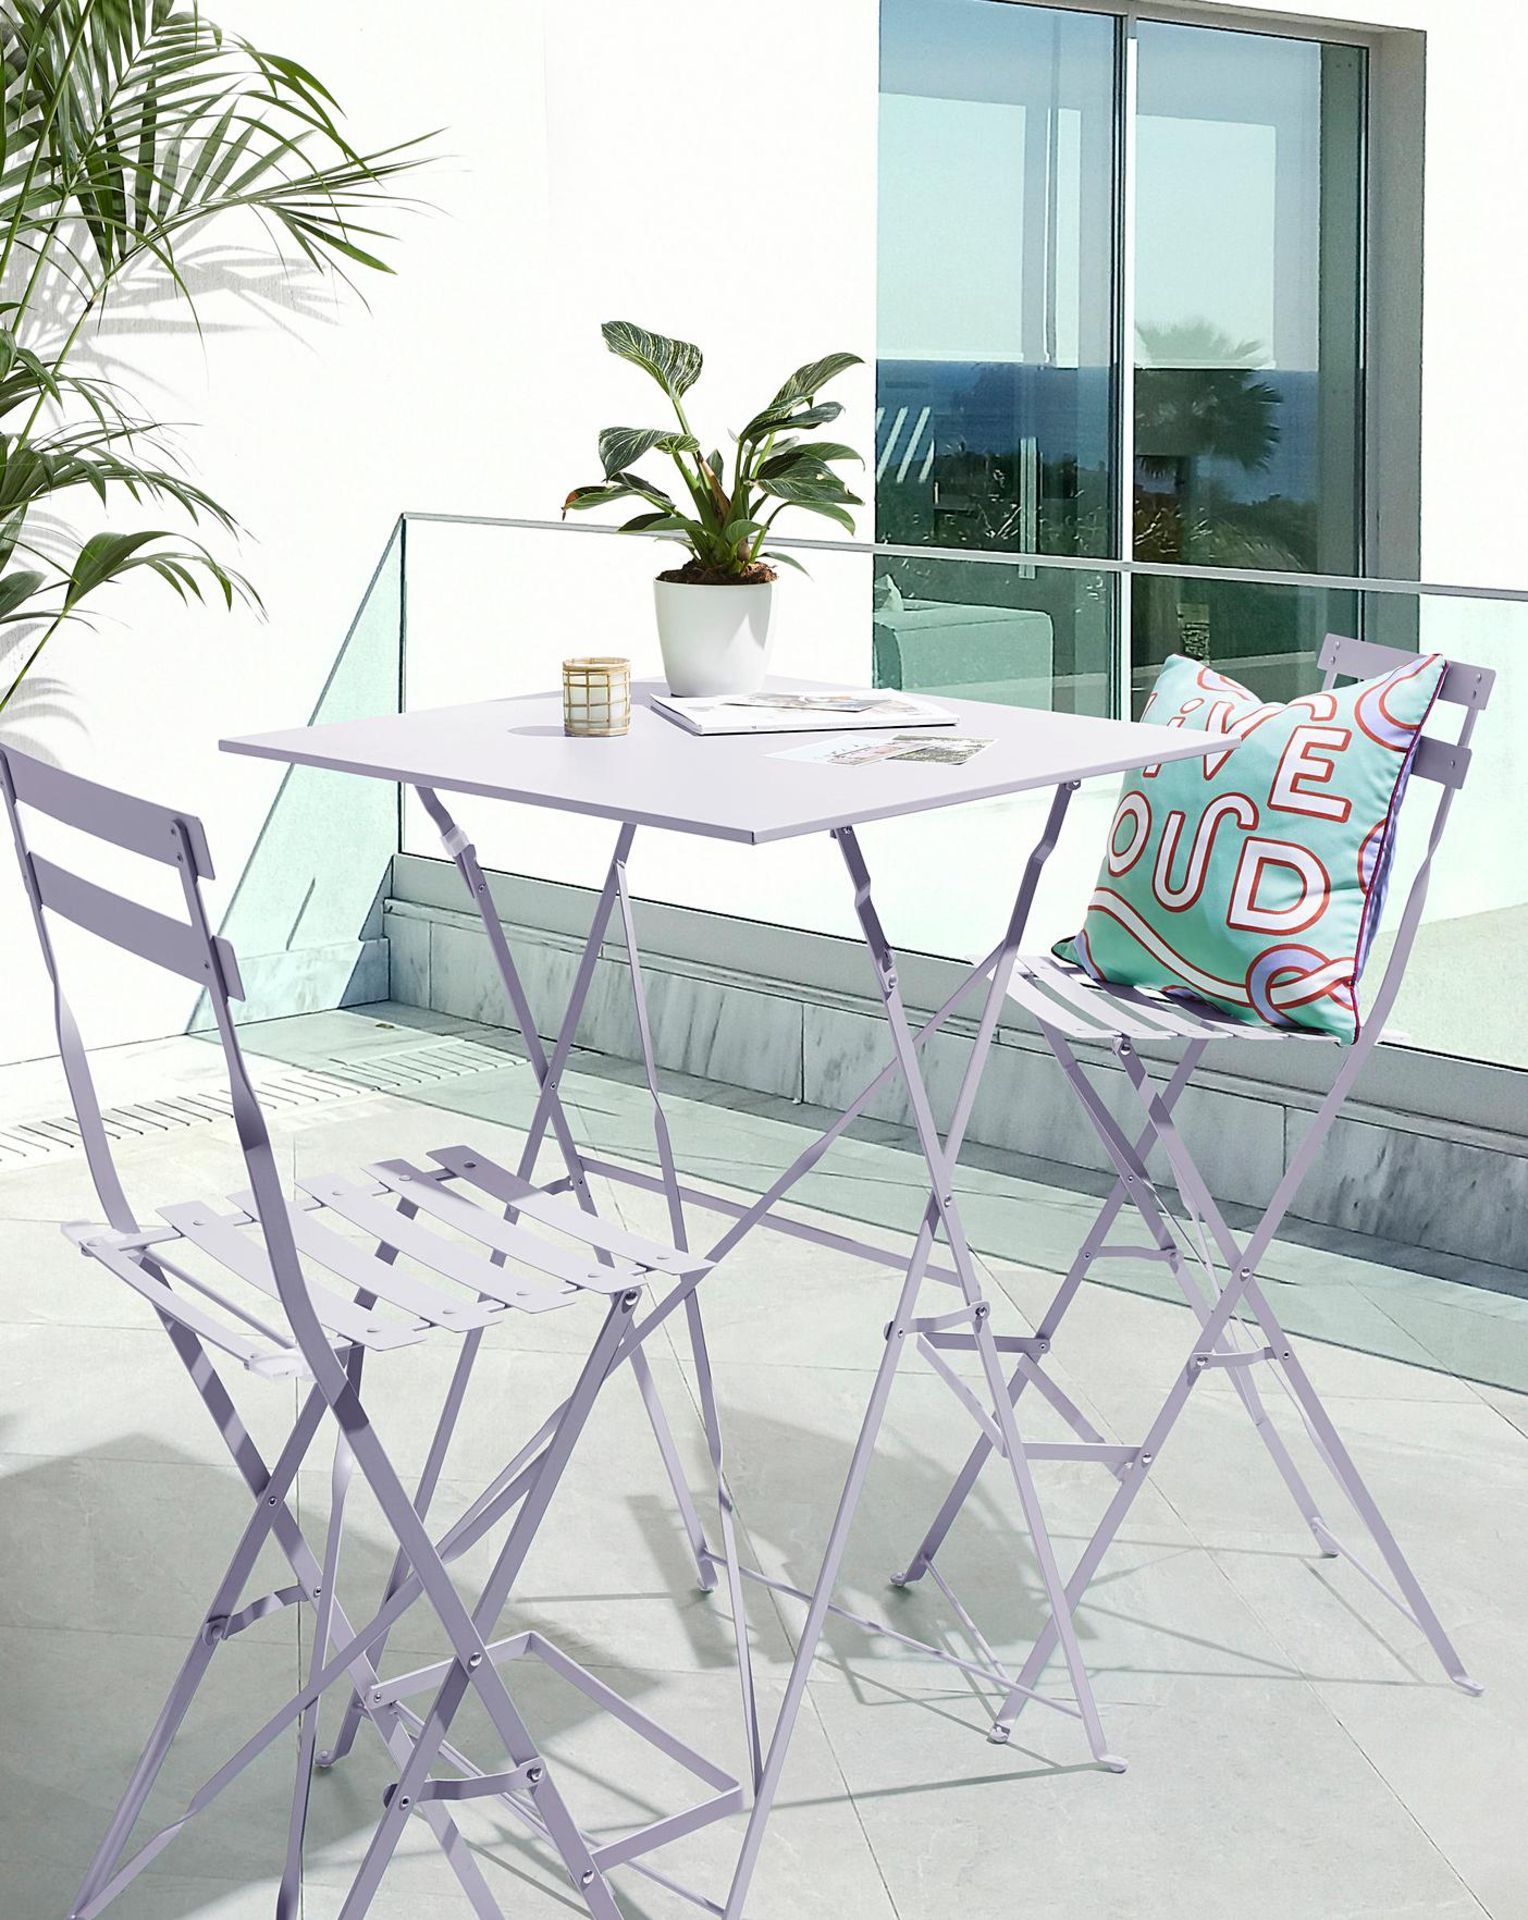 BRAND NEW Palma Bistro Bar Set LILAC. RRP £199 EACH. Liven up your garden or balcony with this